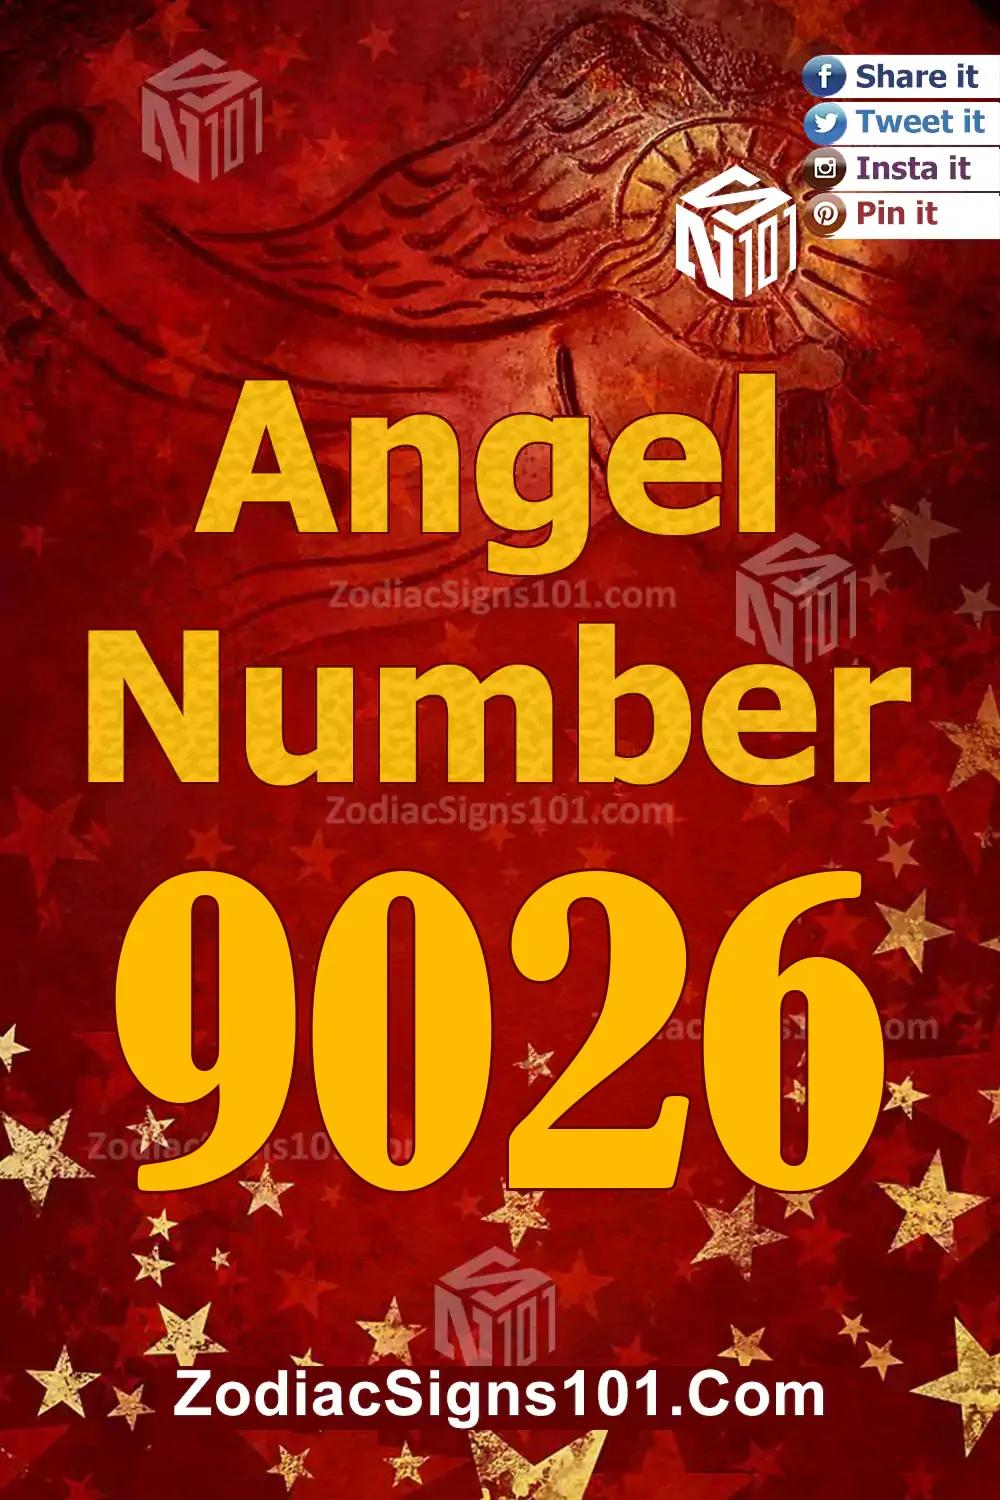 9026 Angel Number Meaning